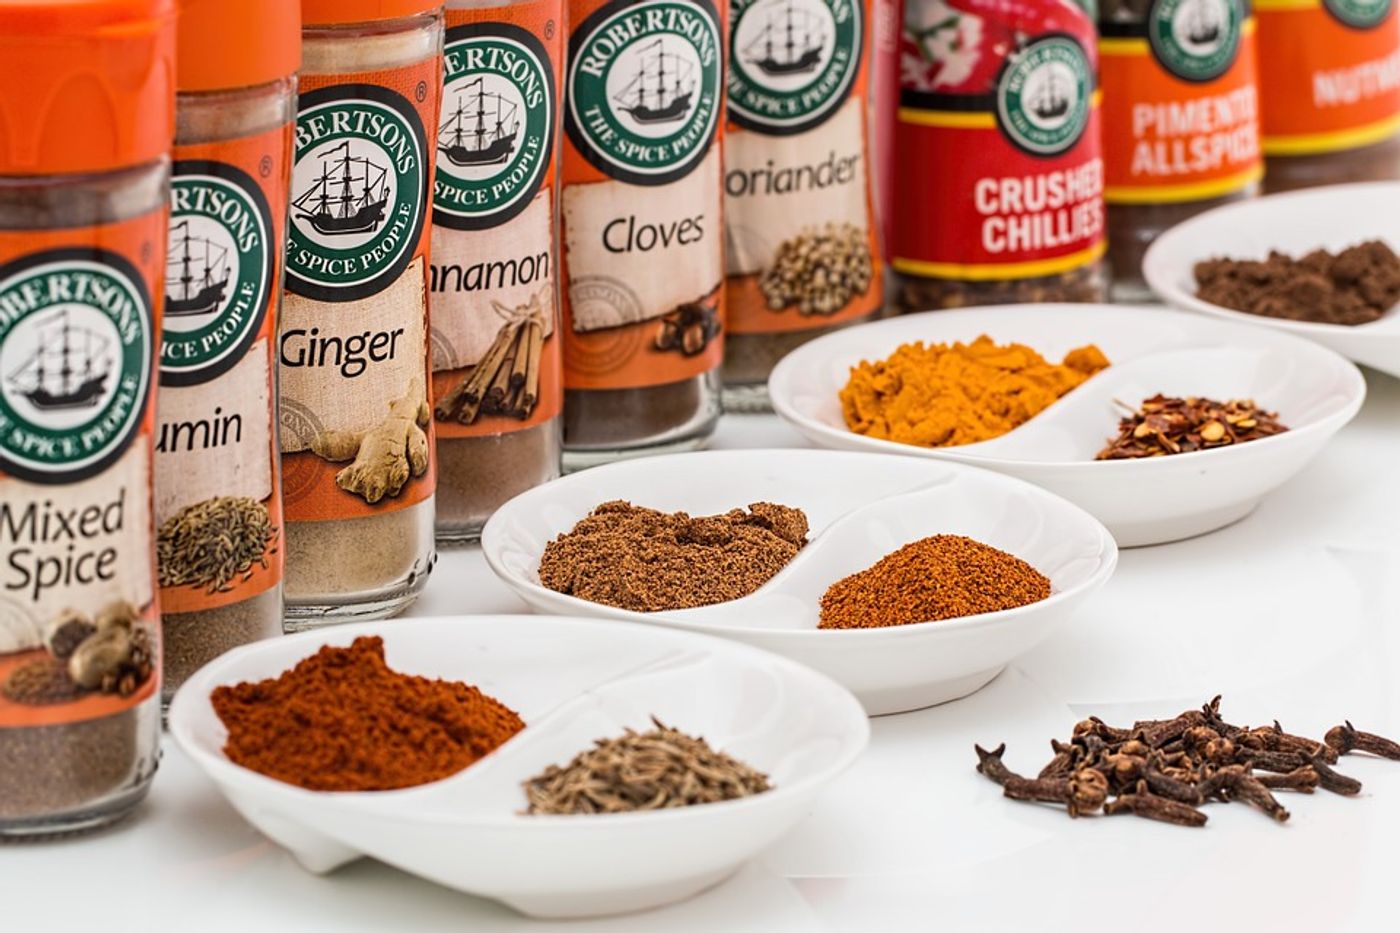 Experts say that a good way to cut down on salt consumption - and to lower your blood pressure - is to use a lot of spices during cooking.